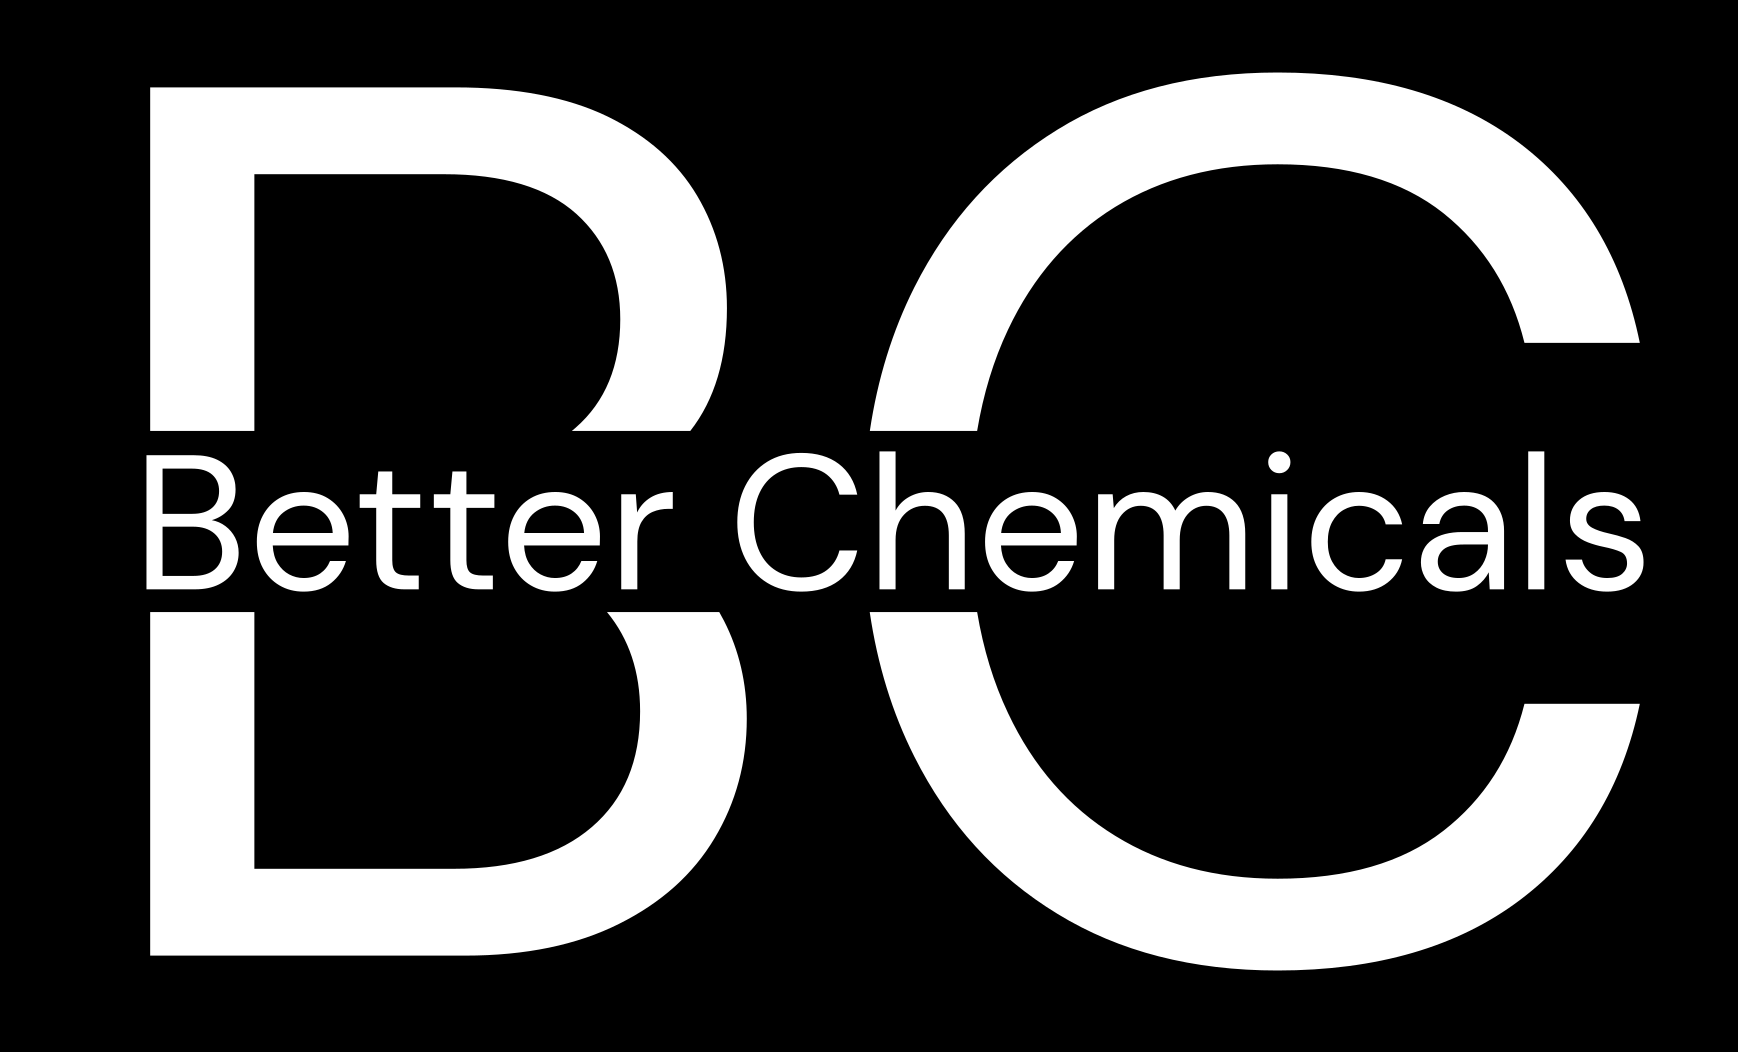 Better Chemicals